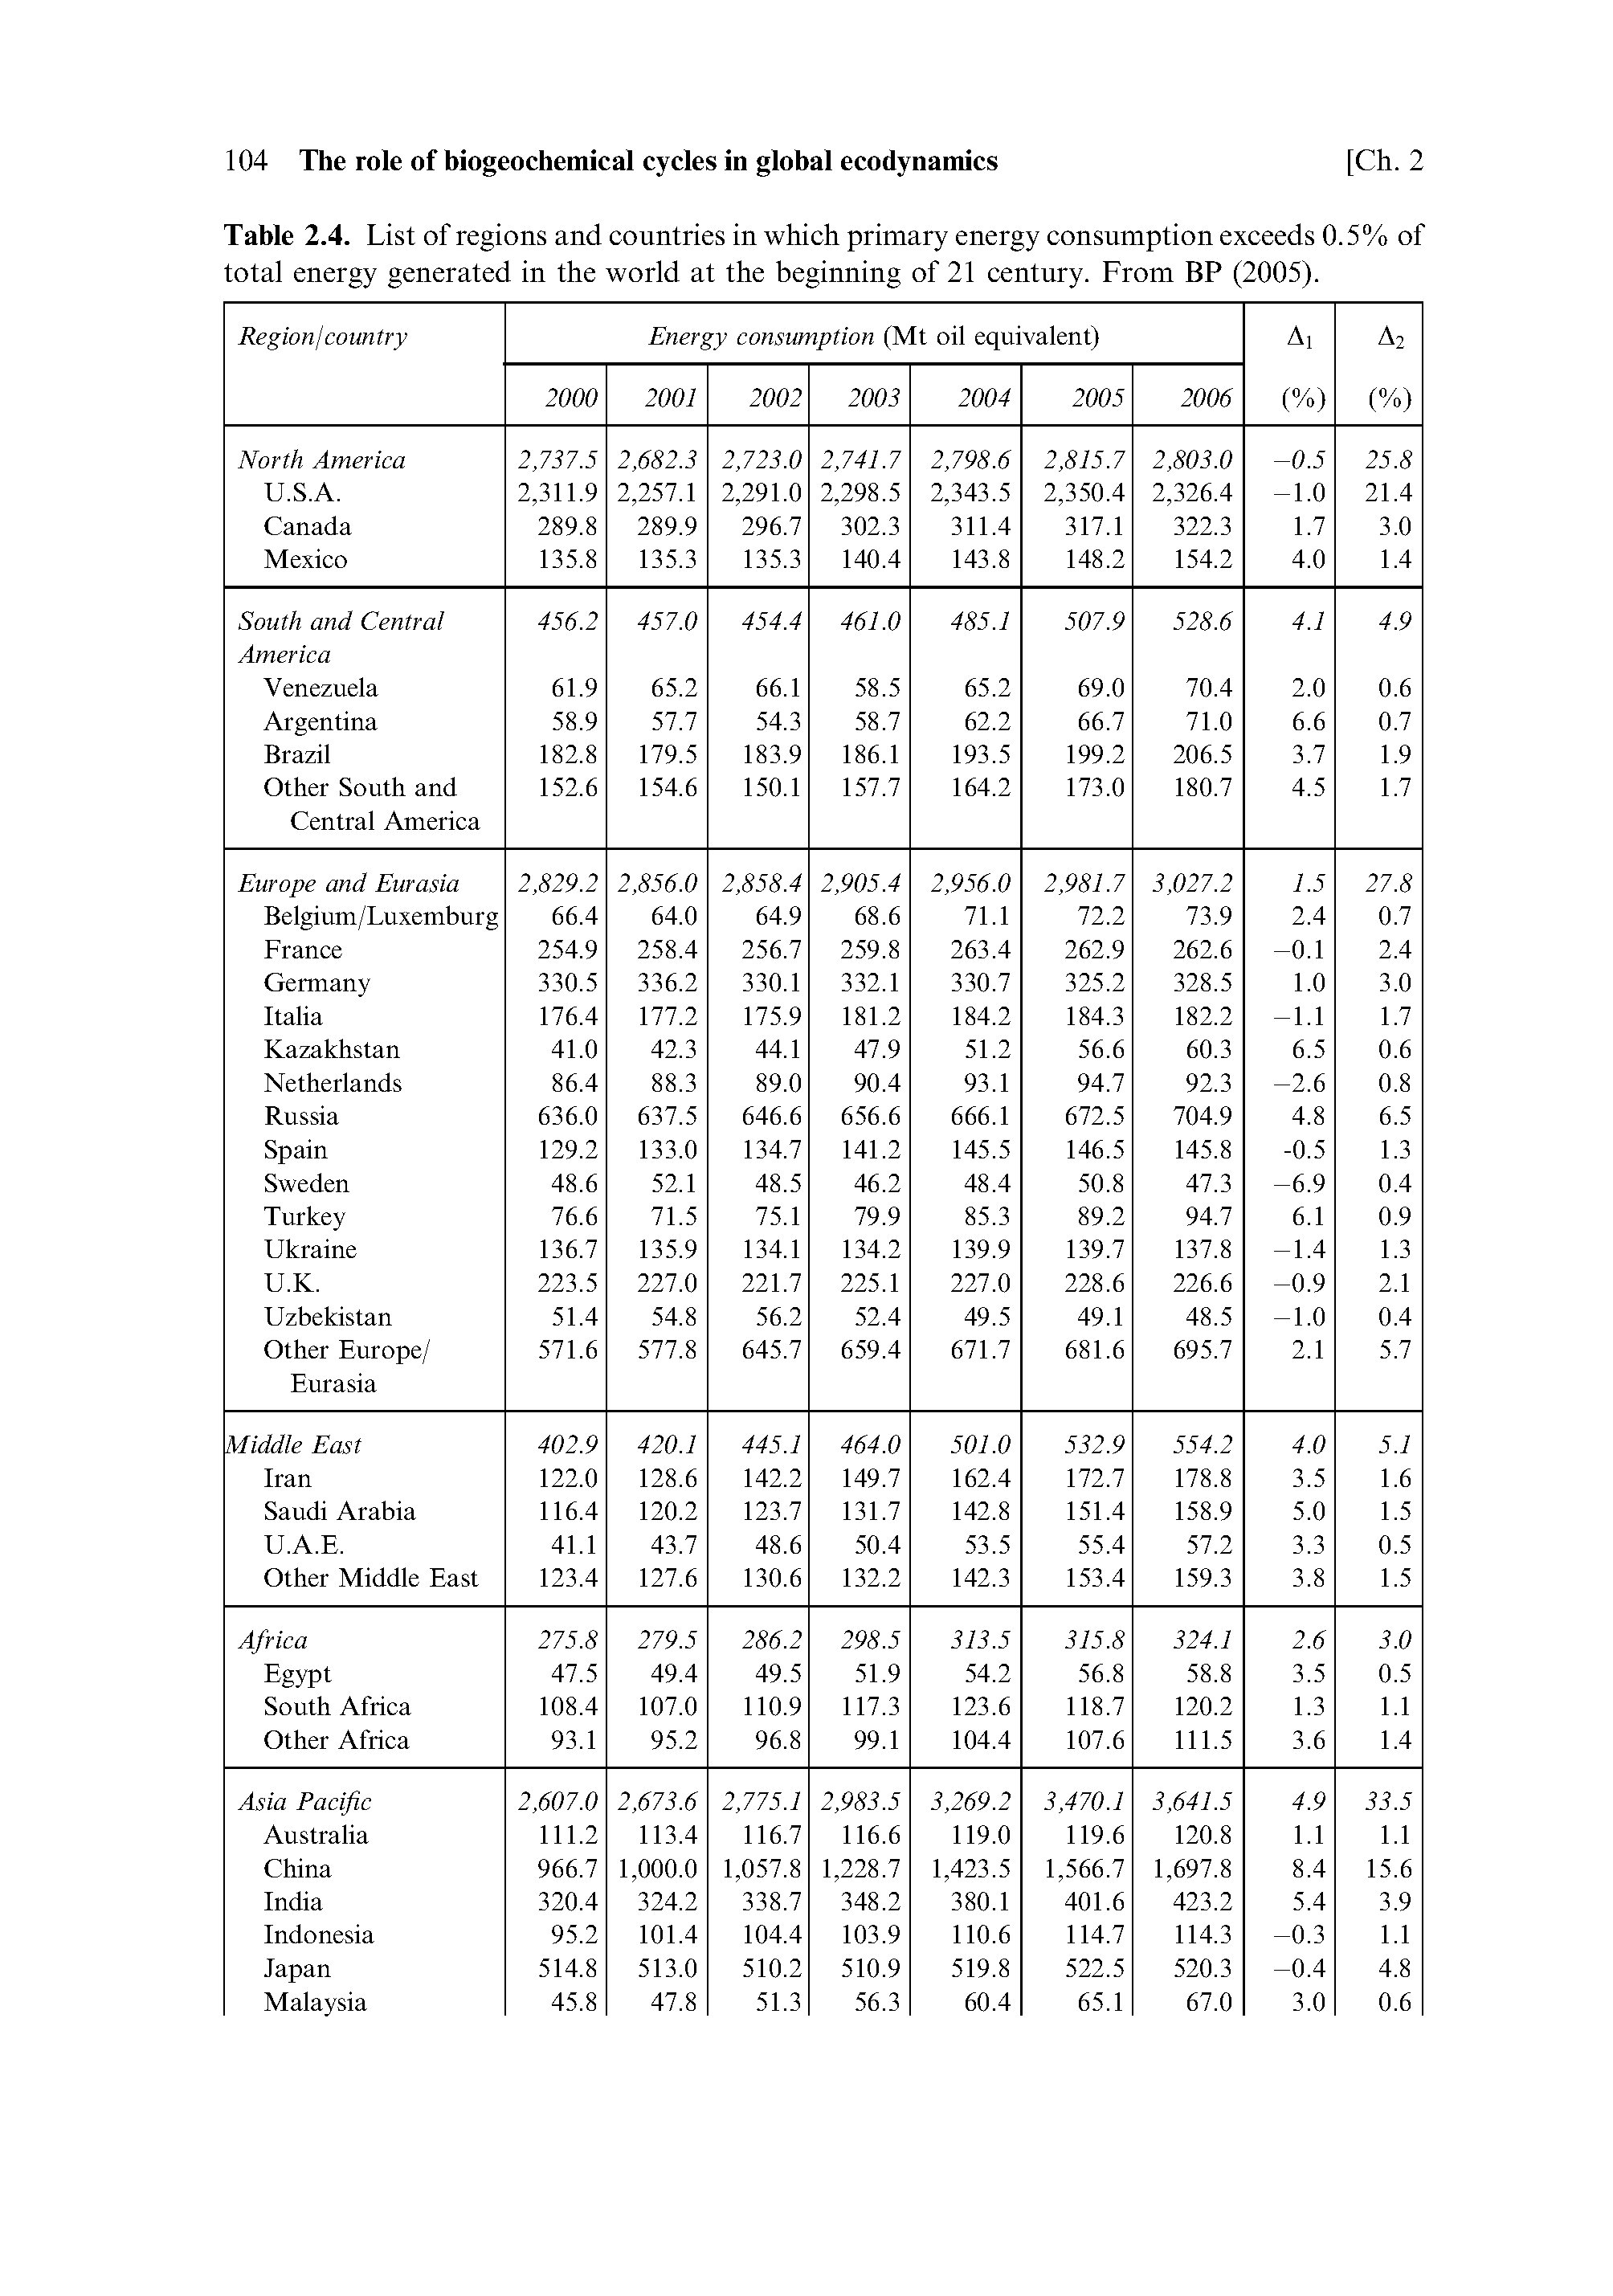 Table 2.4. List of regions and countries in which primary energy consumption exceeds 0.5% of total energy generated in the world at the beginning of 21 century. From BP (2005).